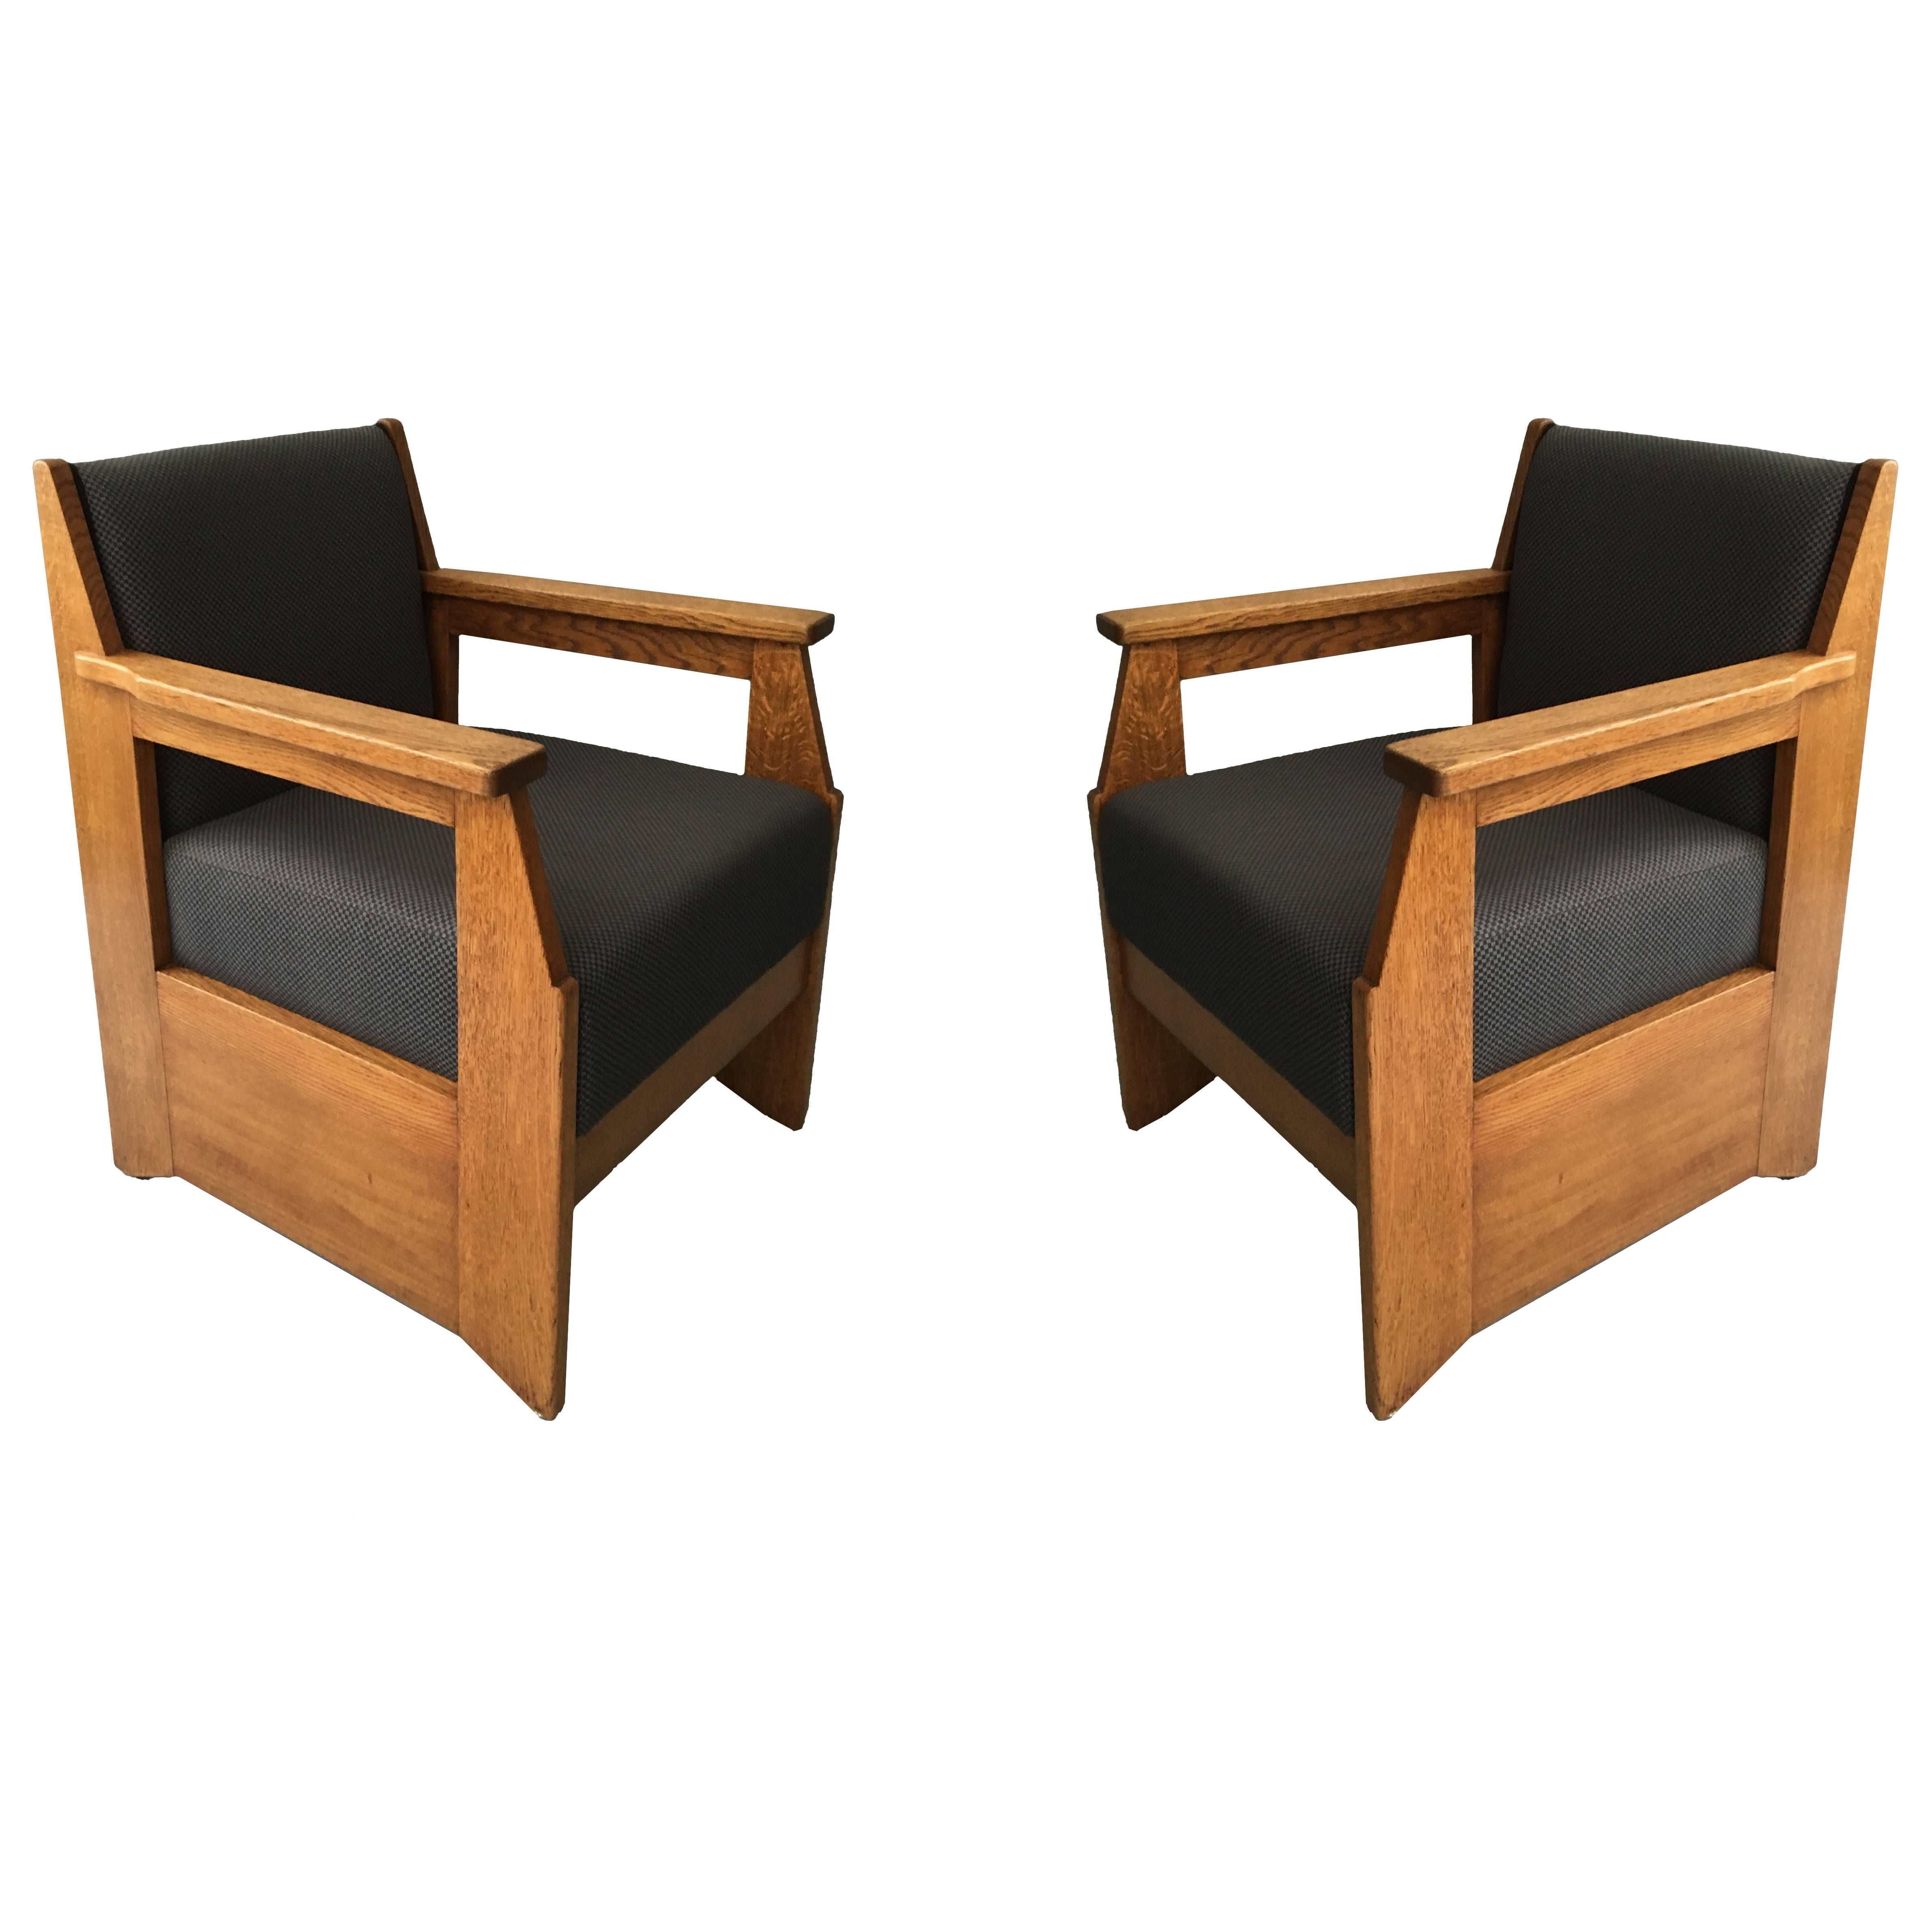 Pair of Oak Armchairs Made by Hendrik Wouda, Produced by Pander & Son